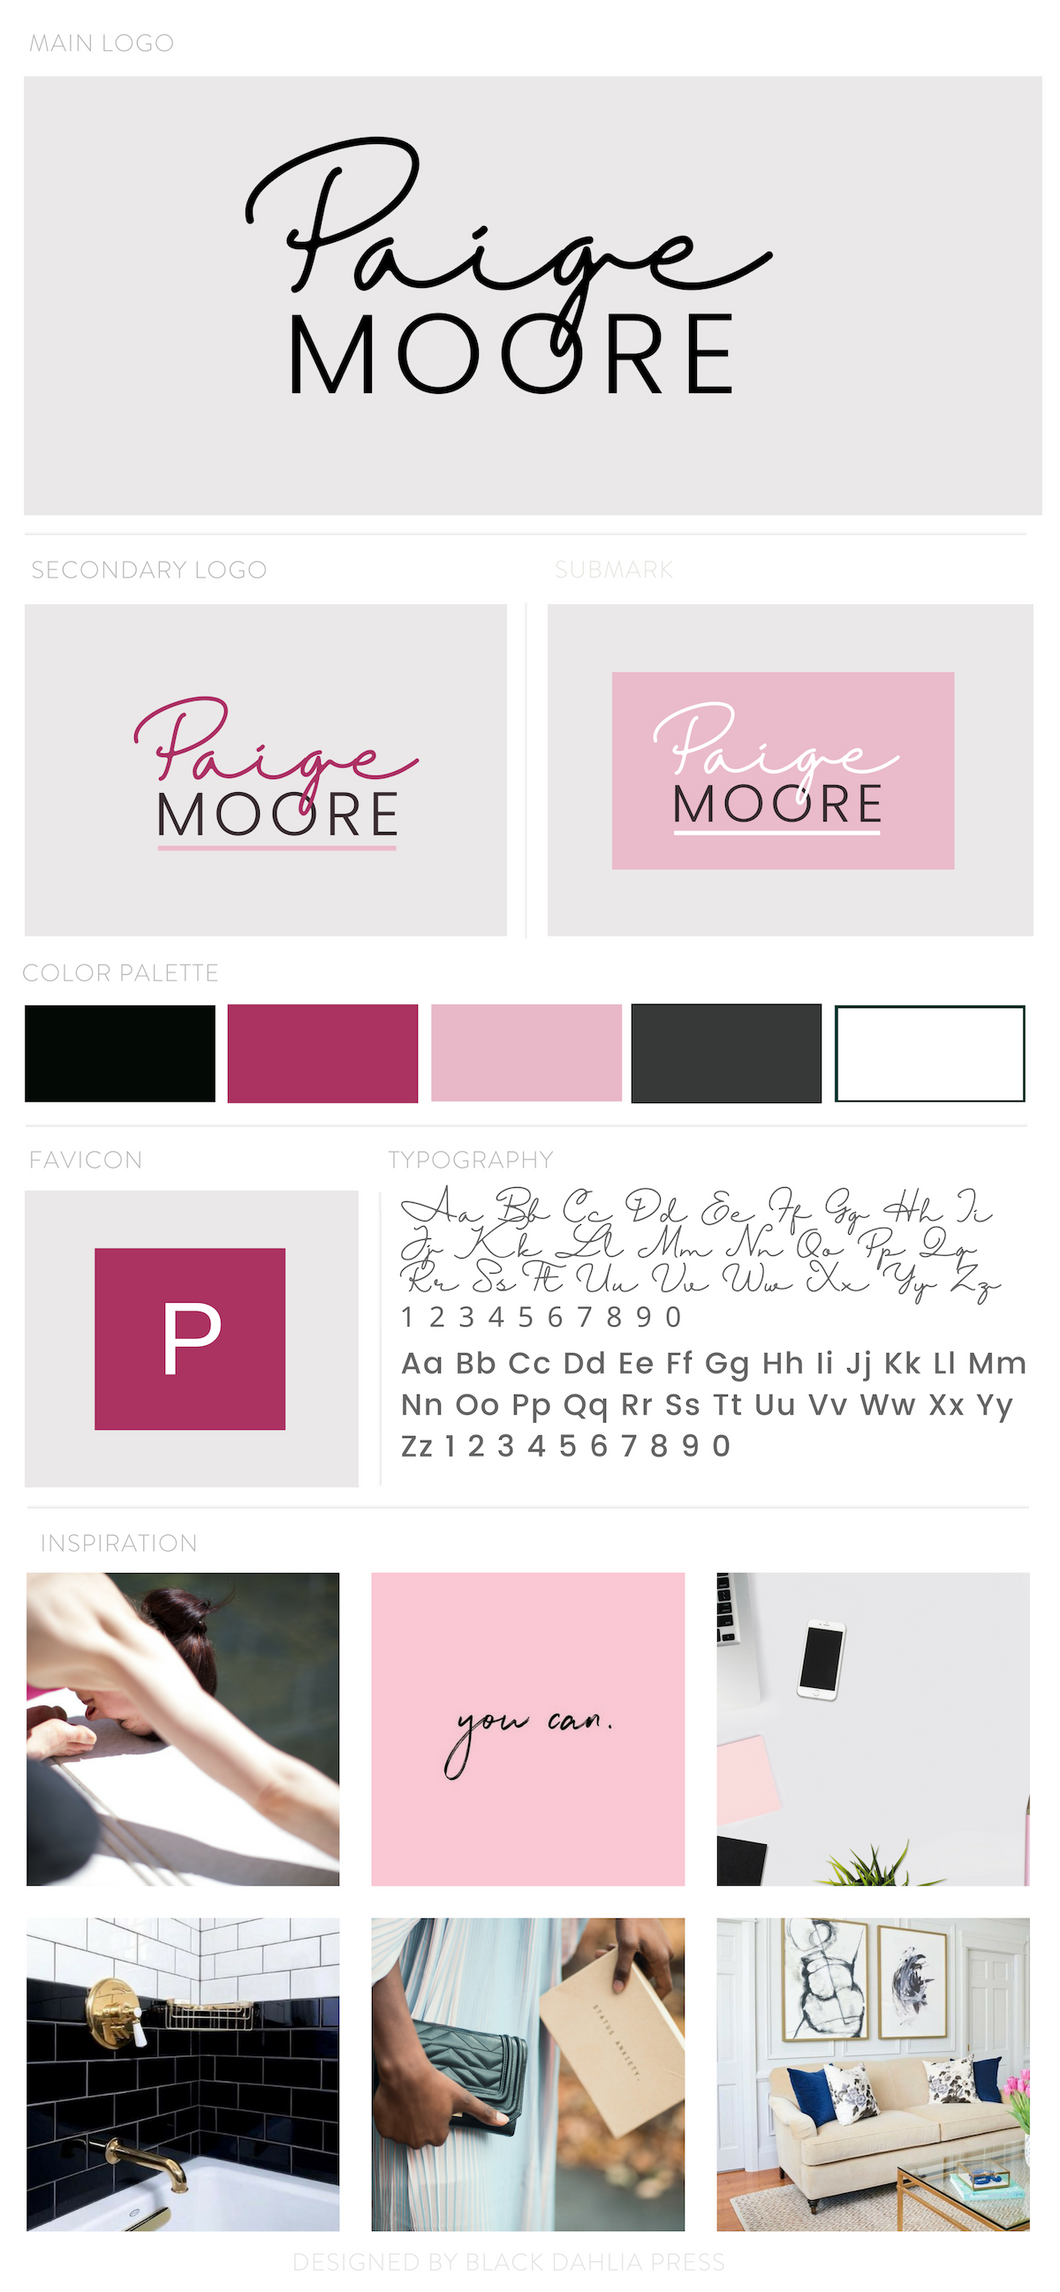 Paige Moore Pre-made Brand